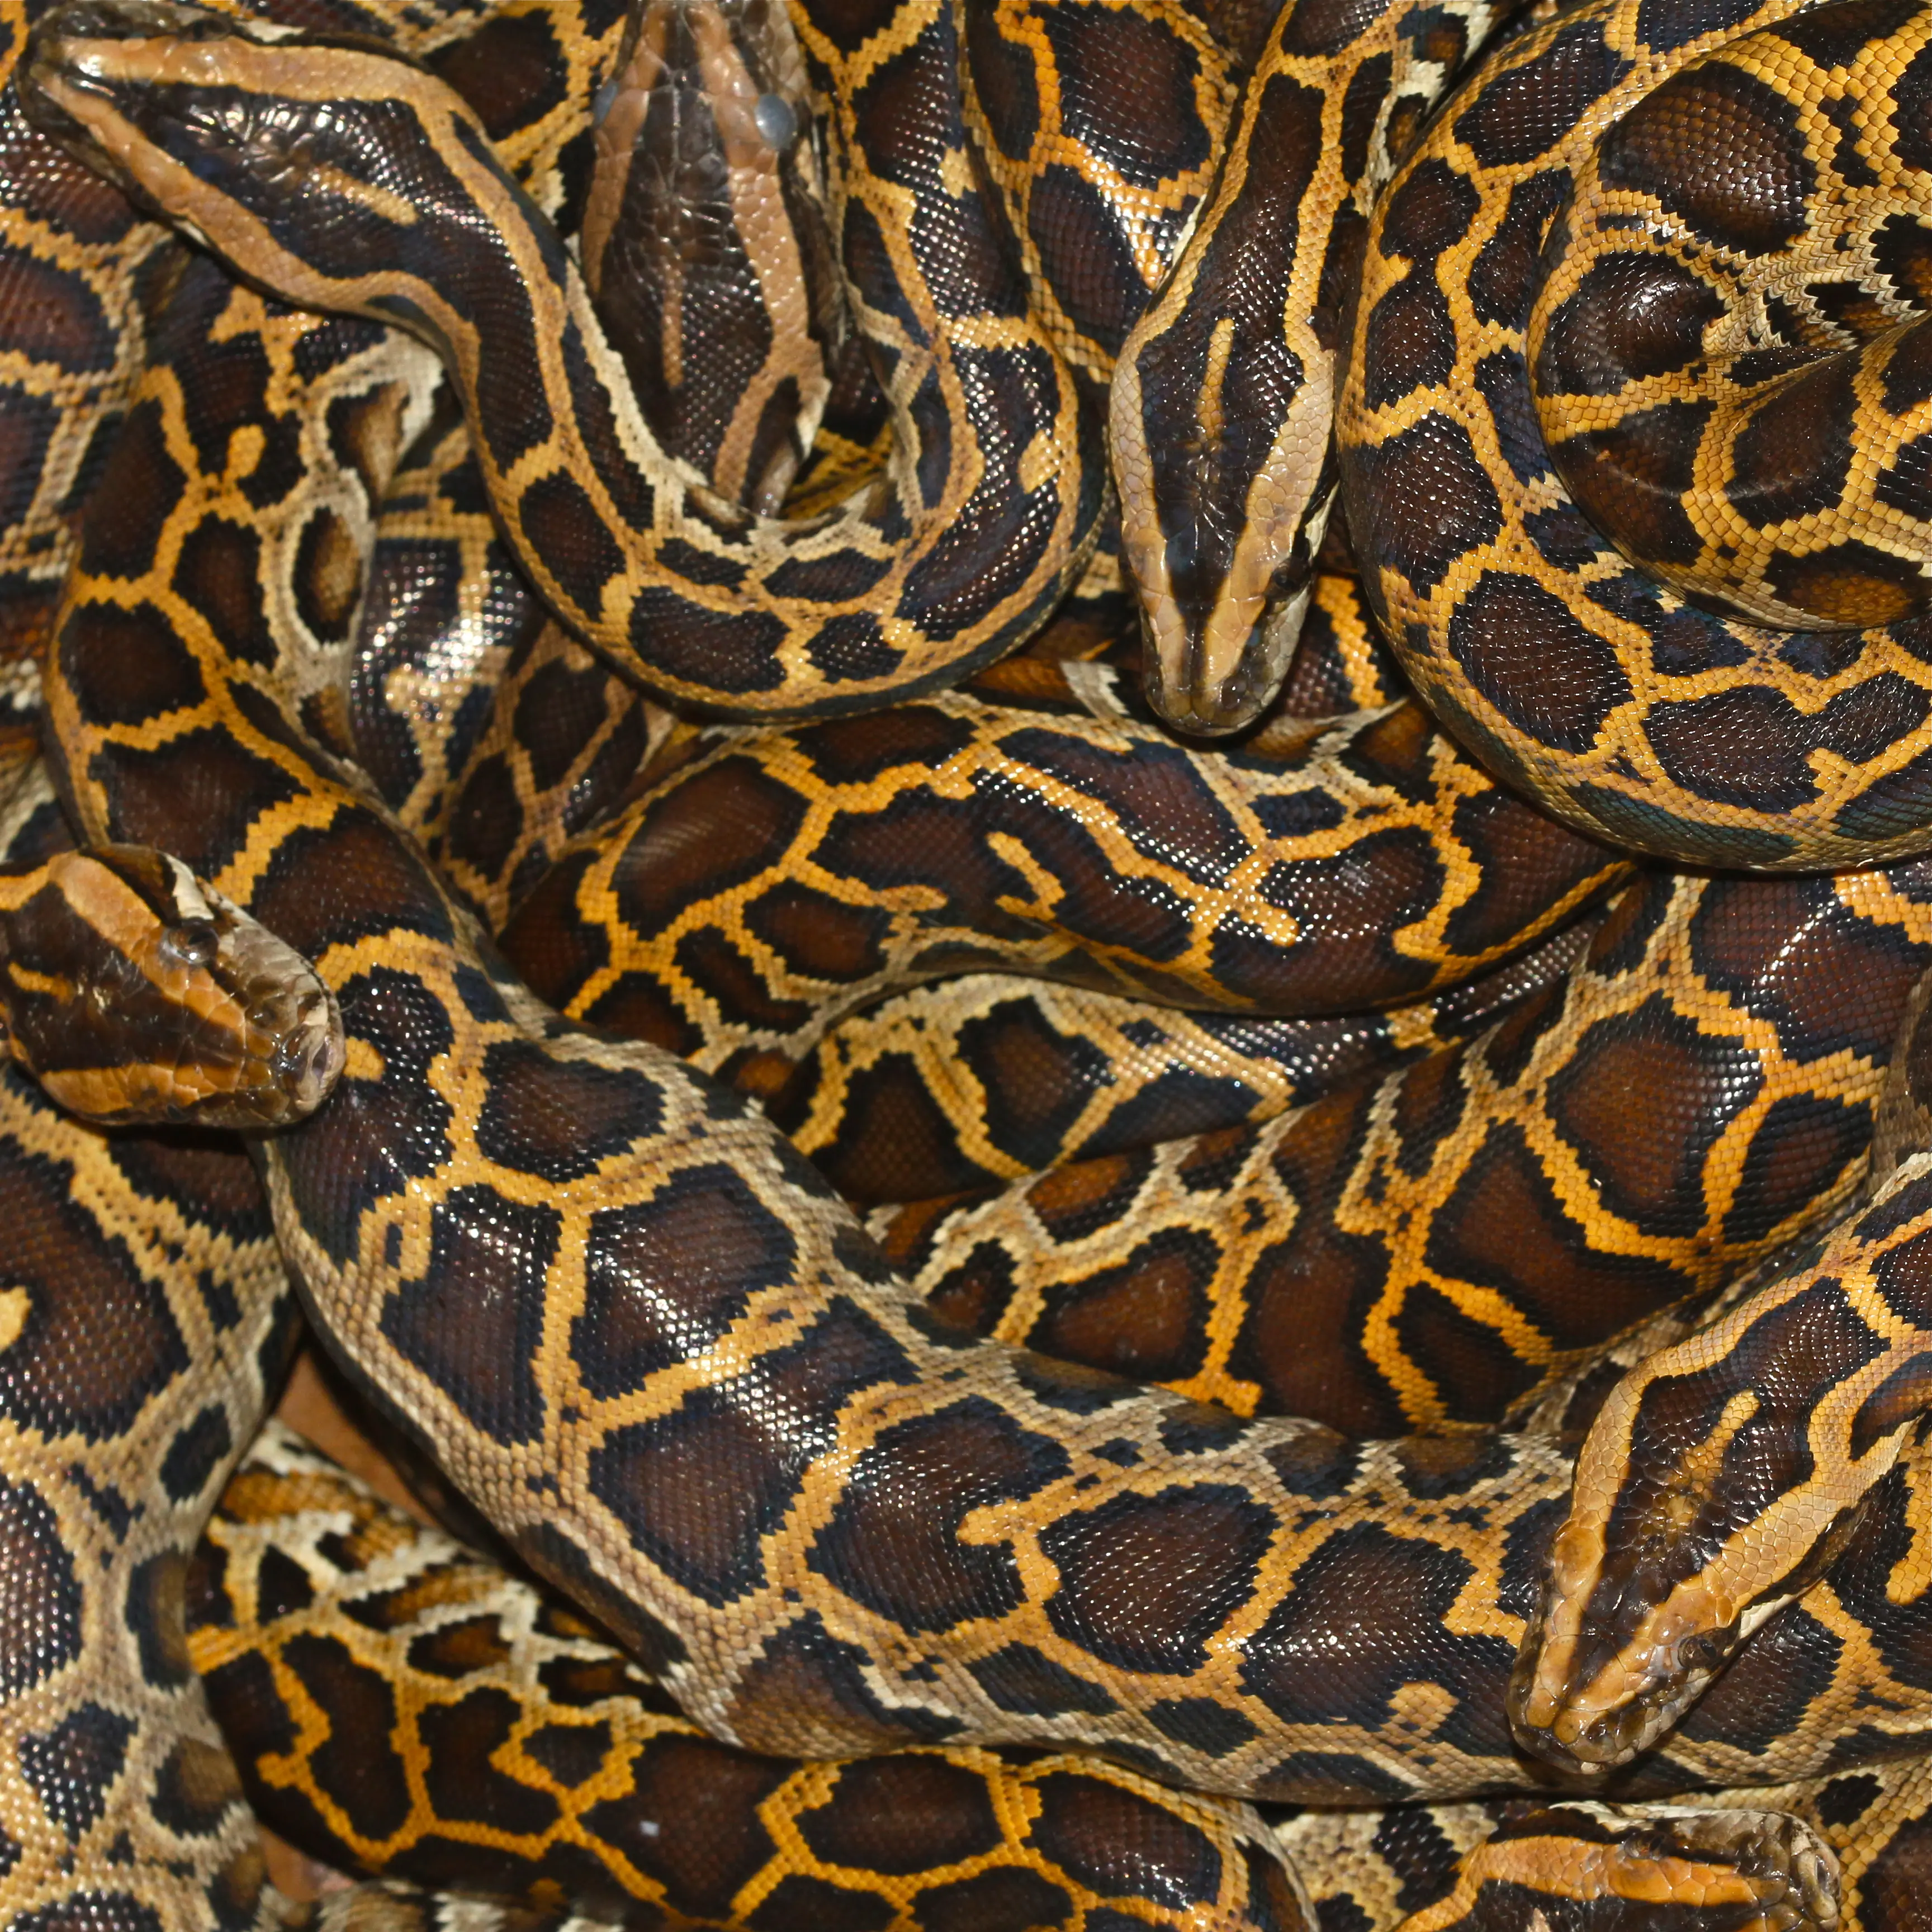 Python skins are traded primarily to meet demands from the fashion industry